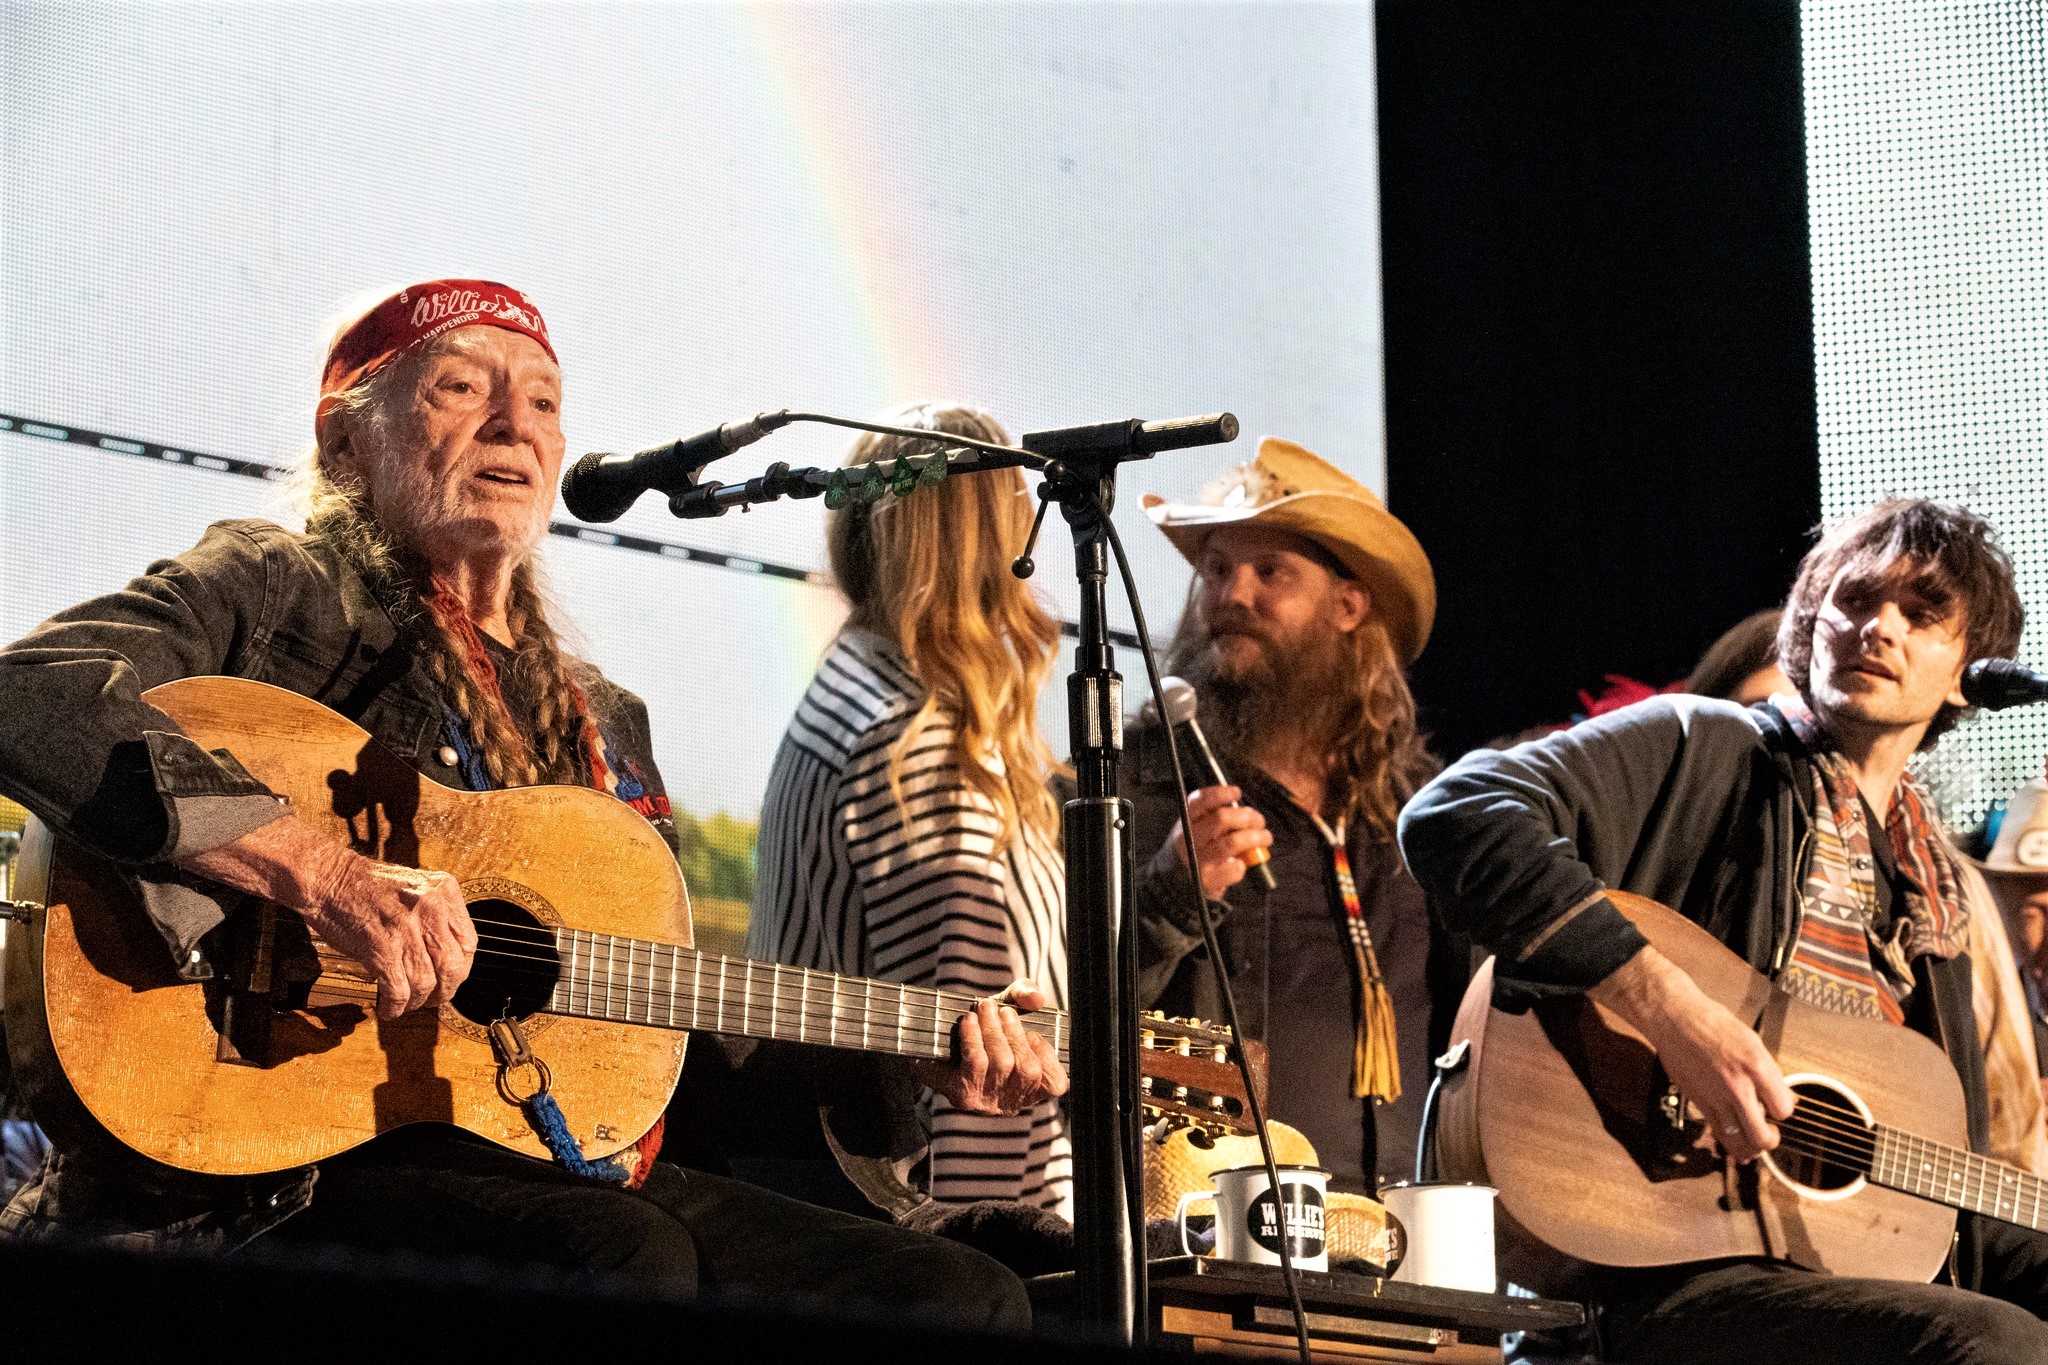 Willie Nelson with Morgane & Chris Stapleton + Particle Kid